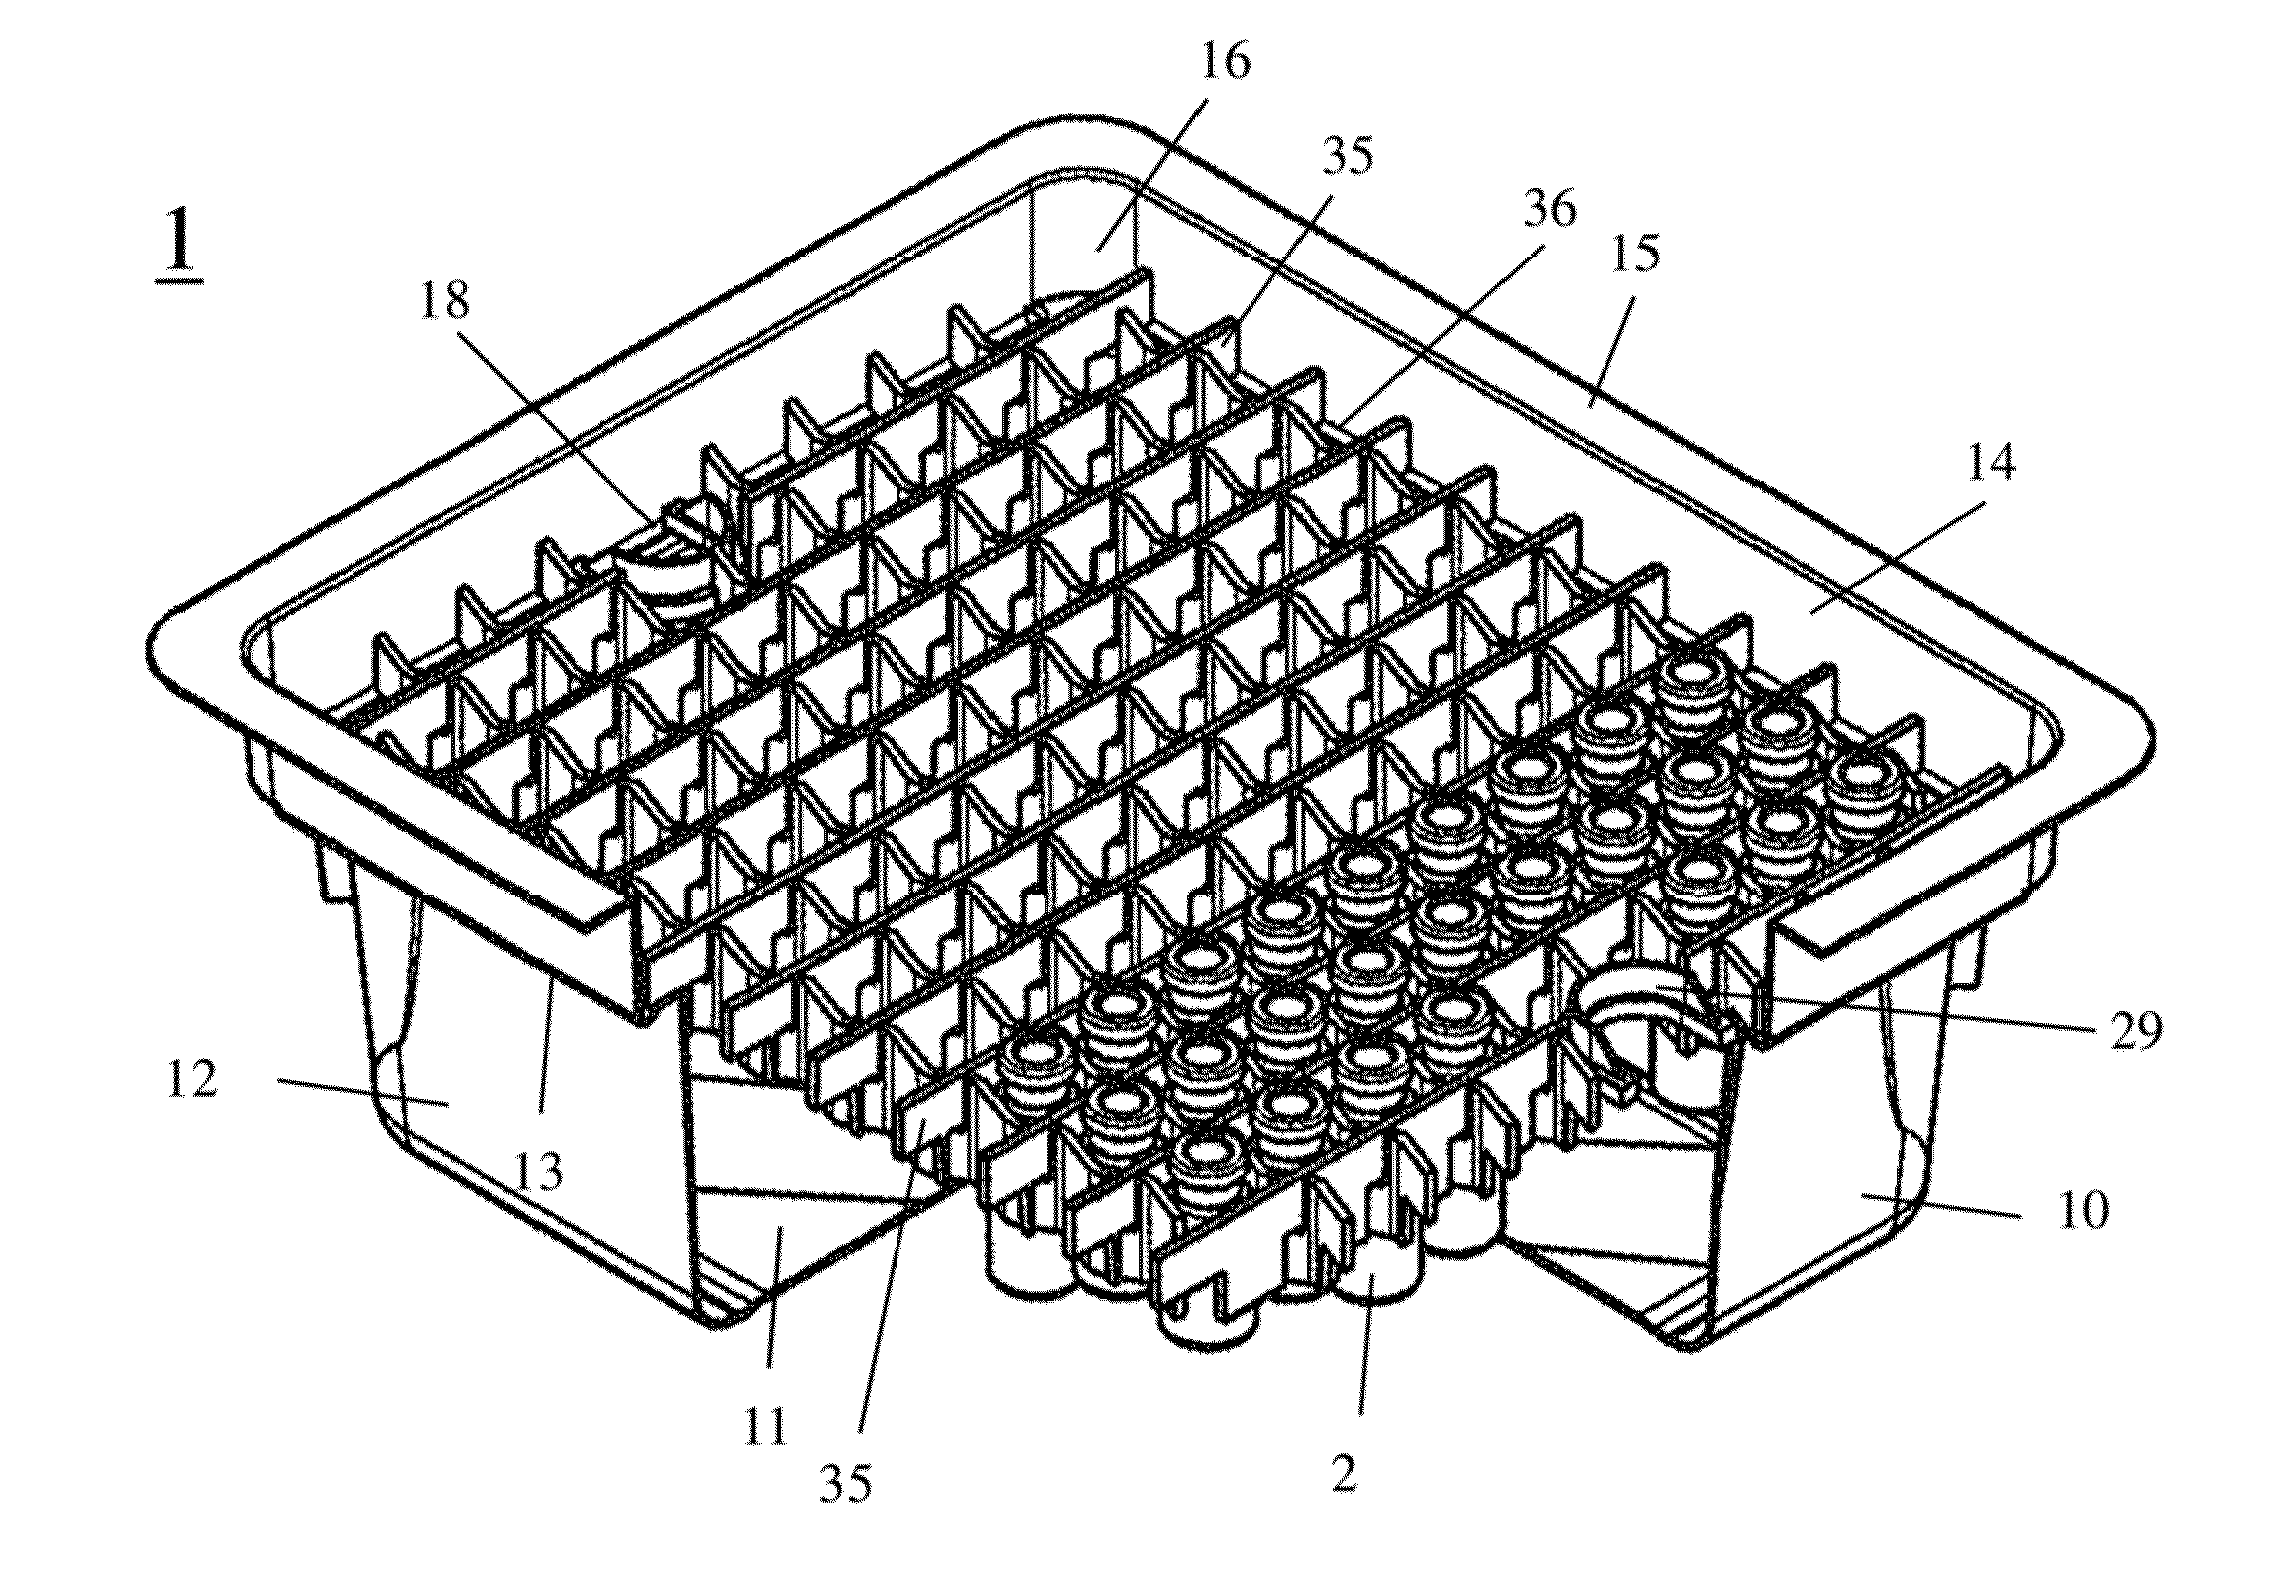 Process and apparatus for treating containers for storing substances for medical, pharmaceutical or cosmetic applications